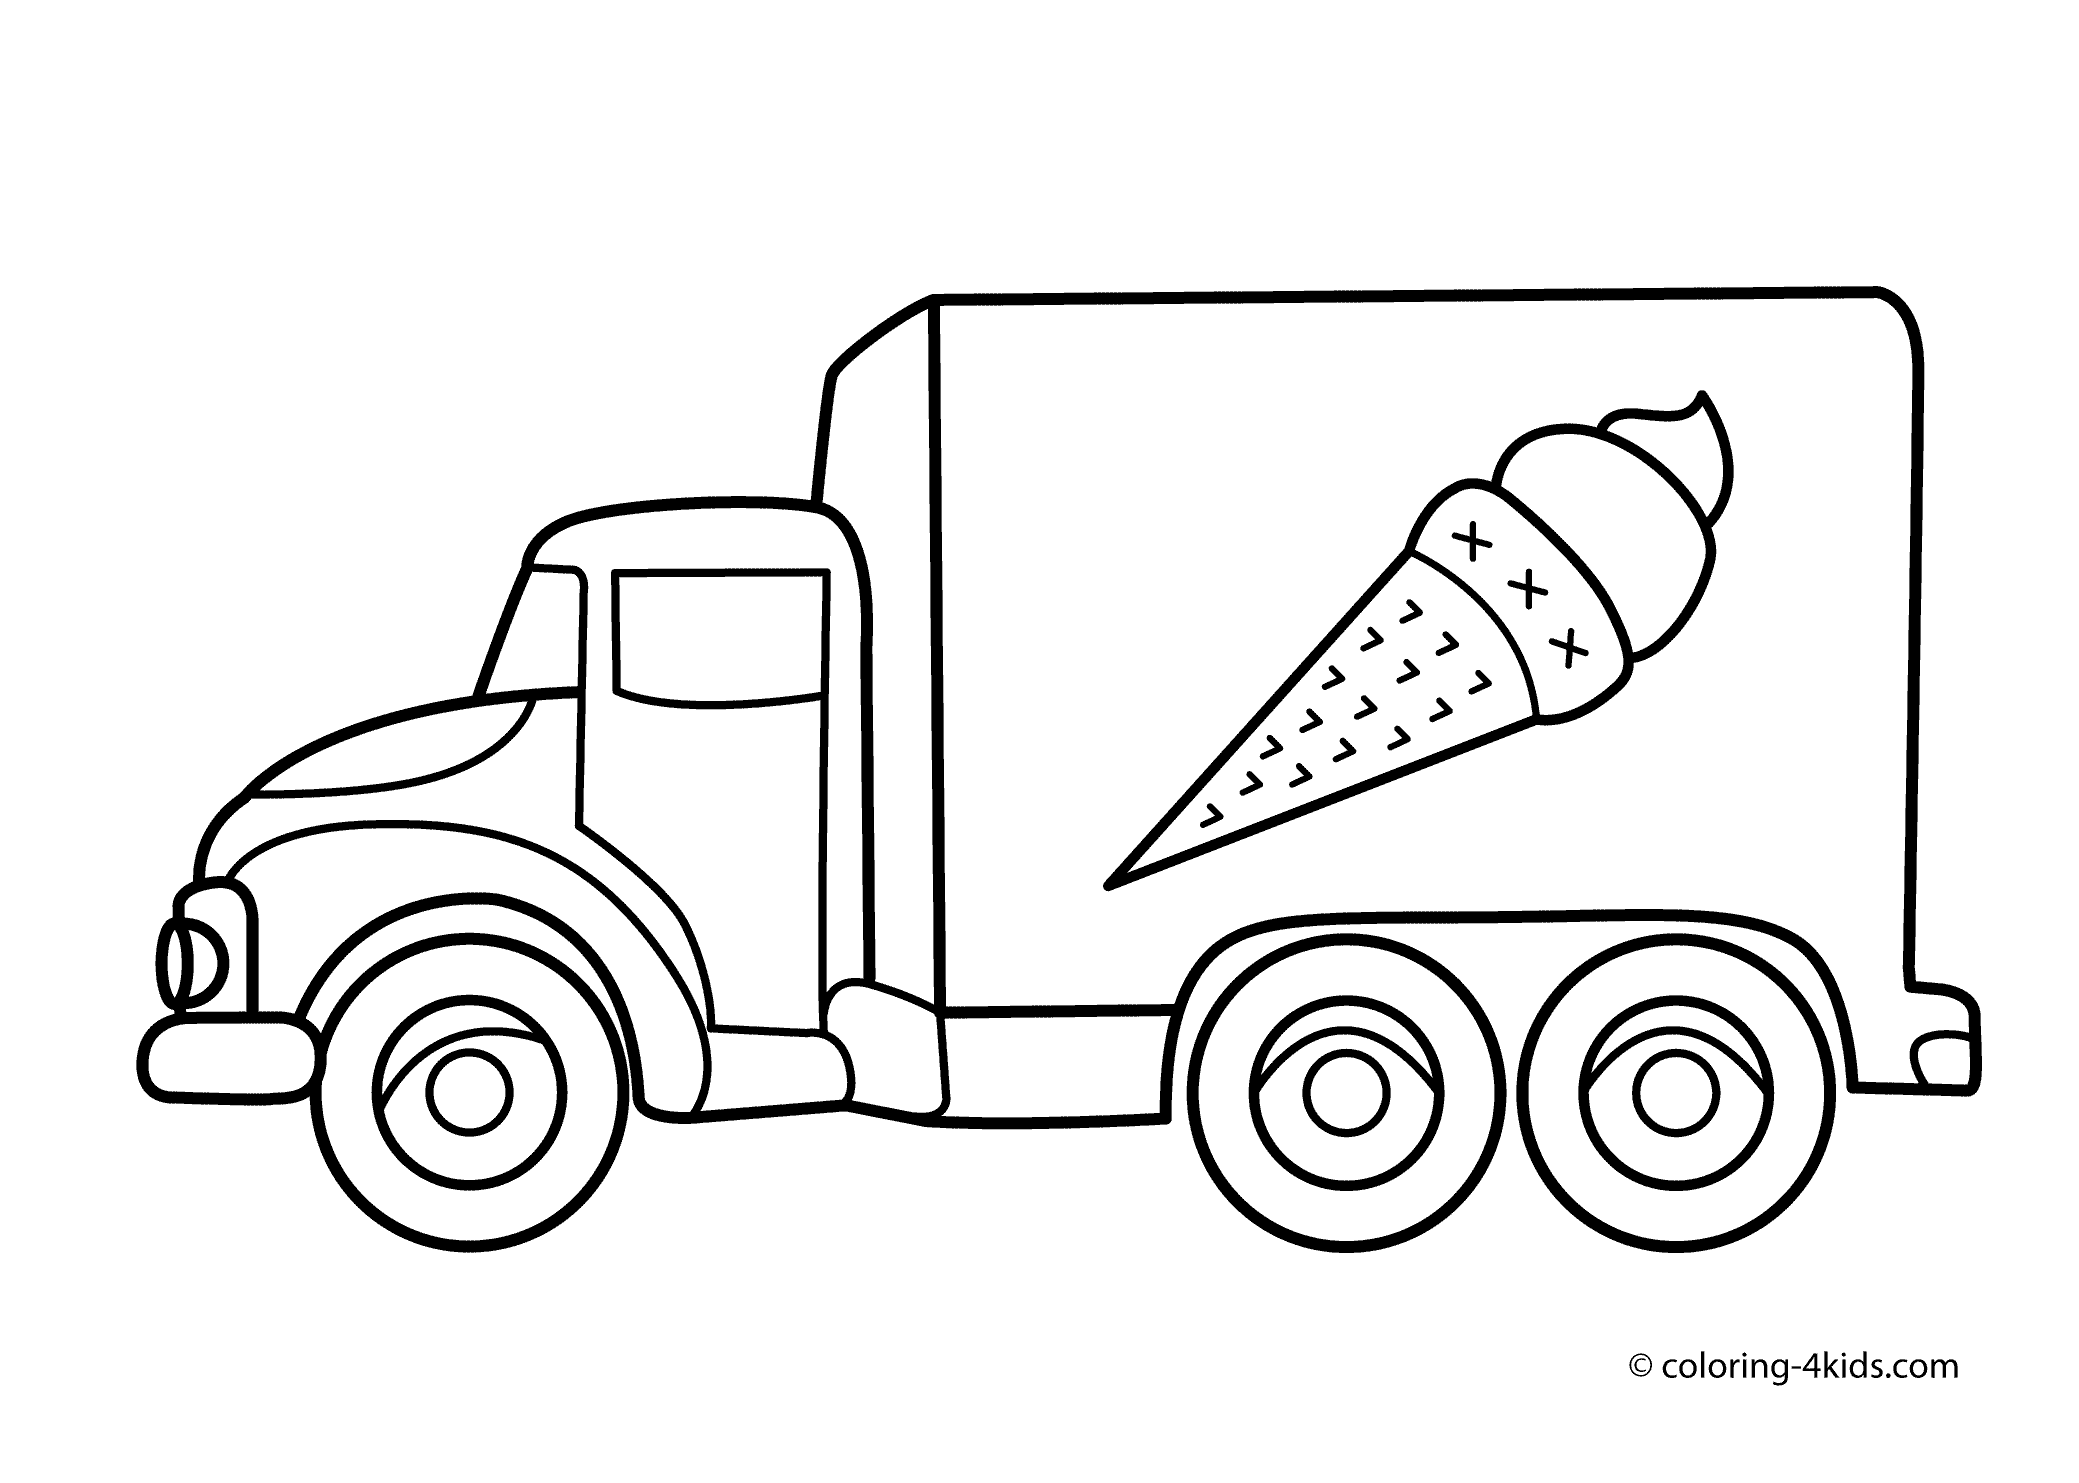 Ice-cream truck transportation coloring pages for kids, printable ...